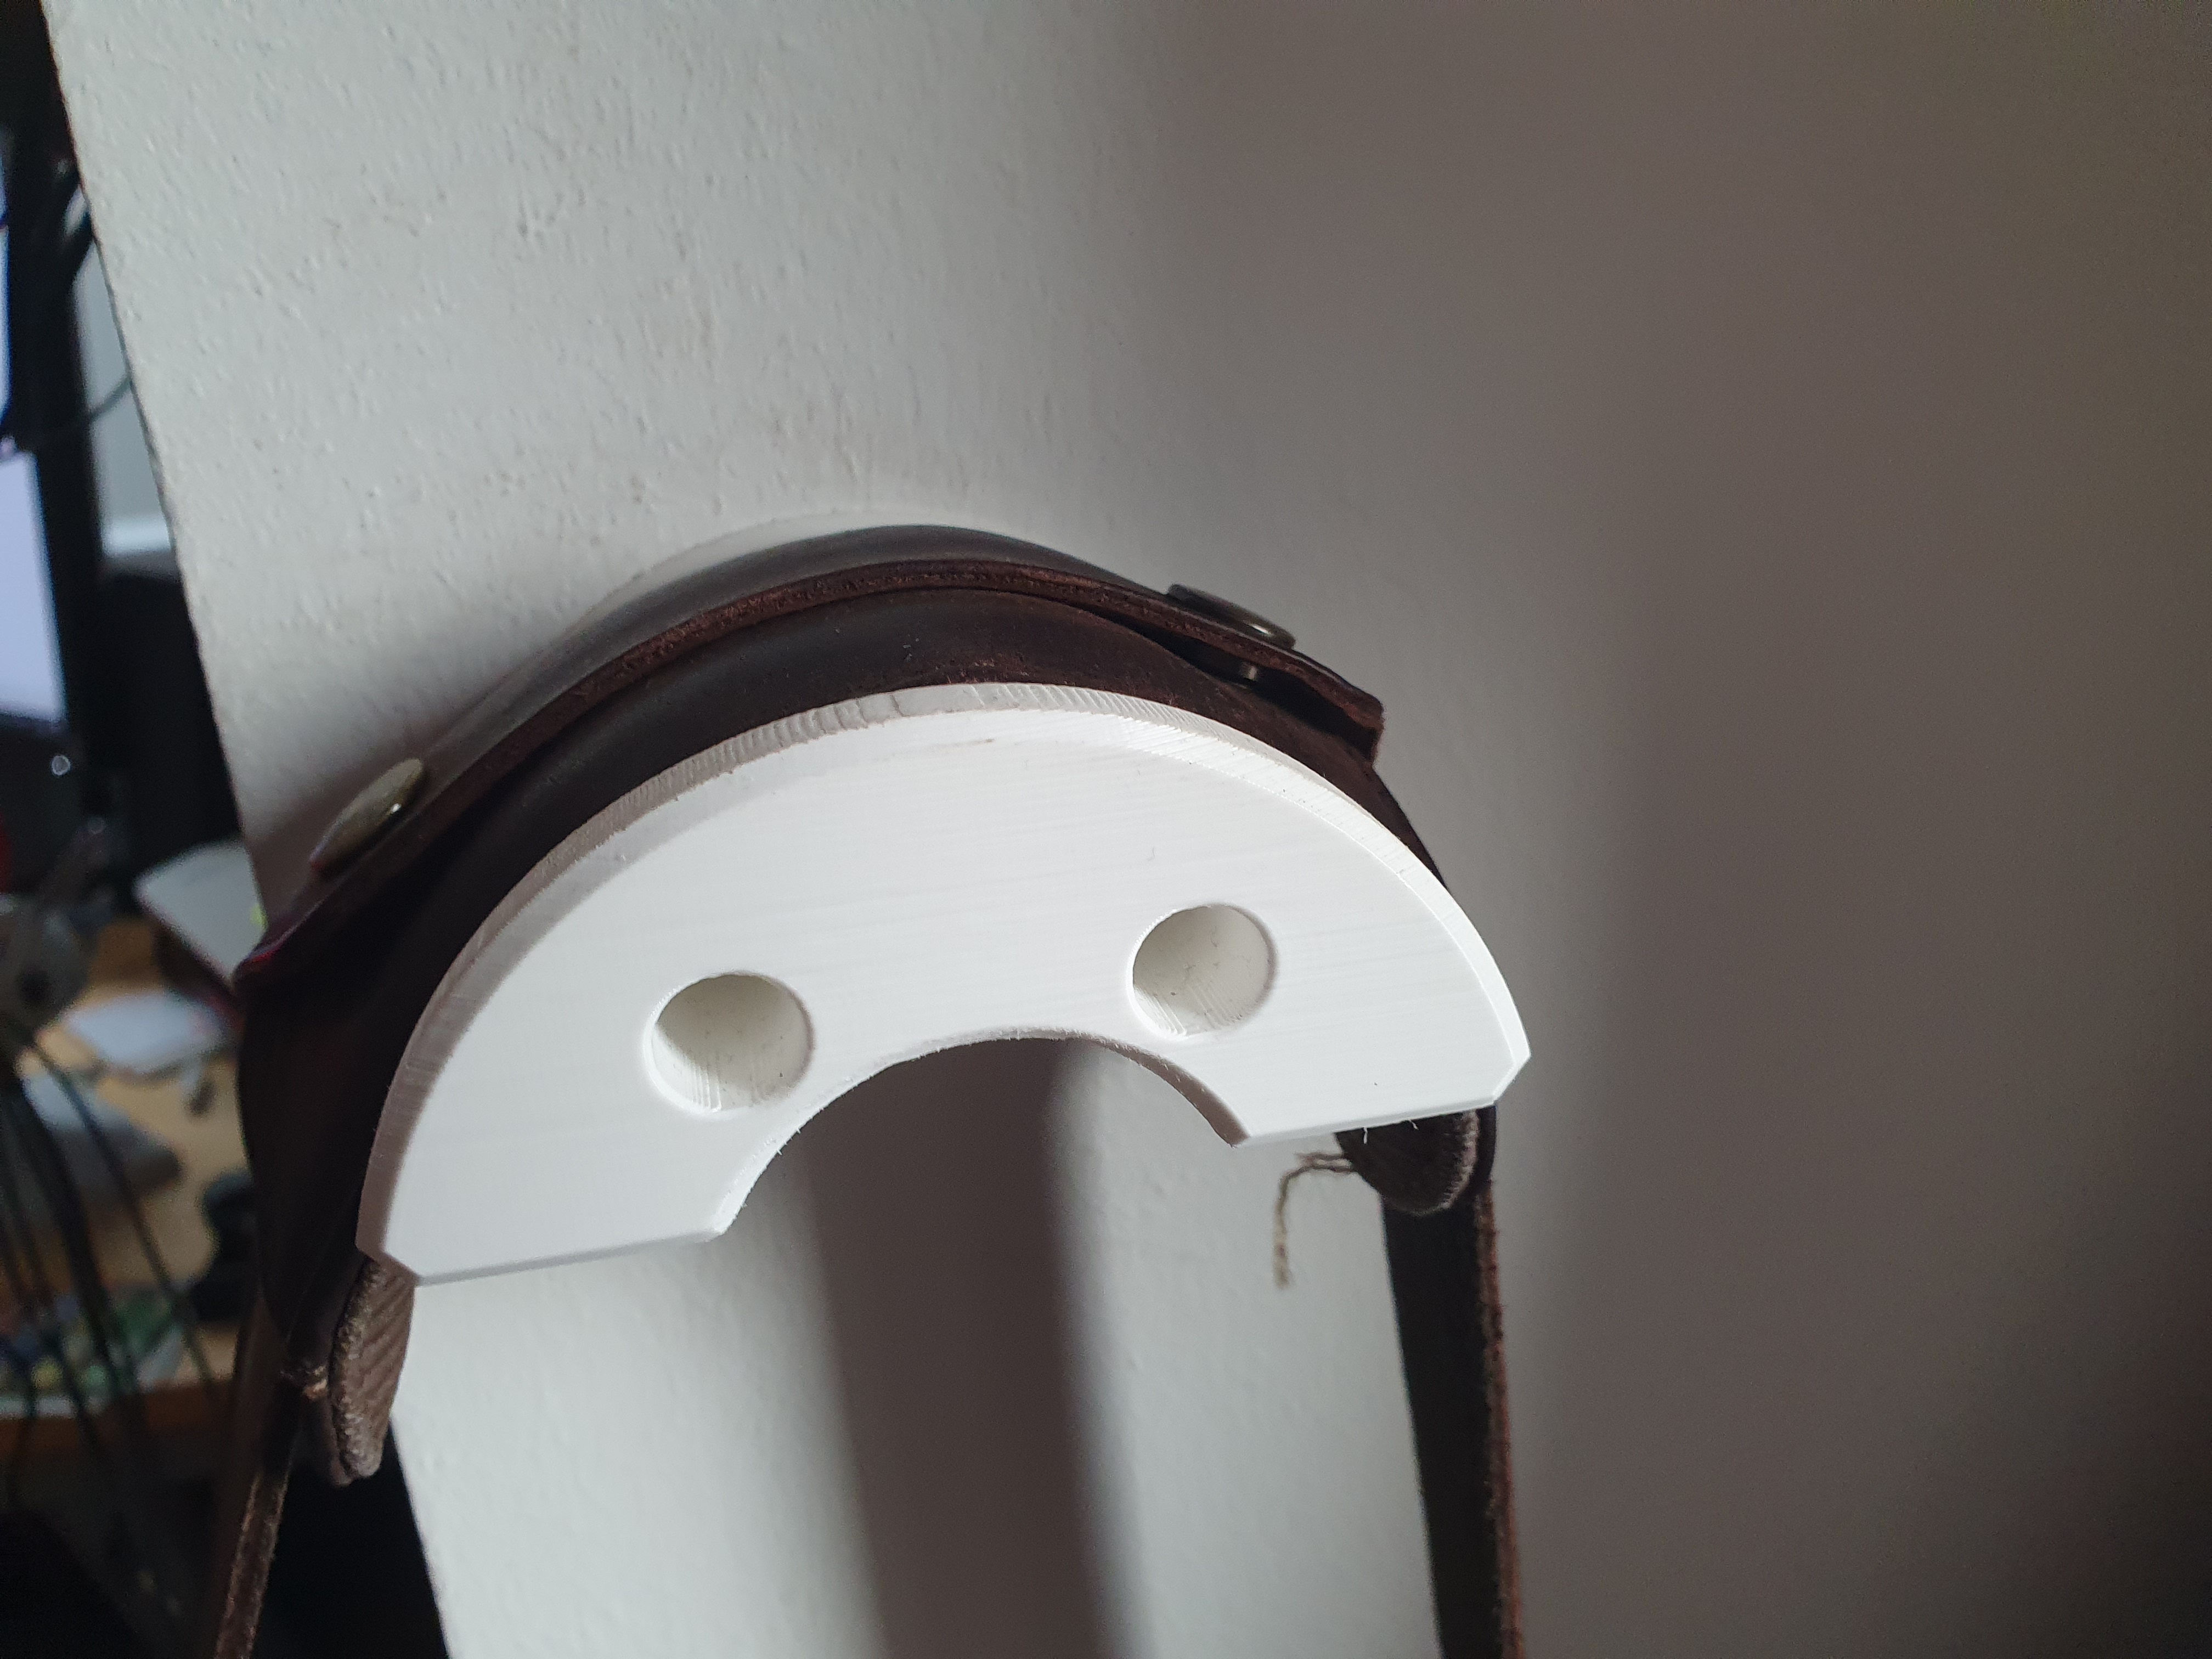 Wall hook for a laptop bag.